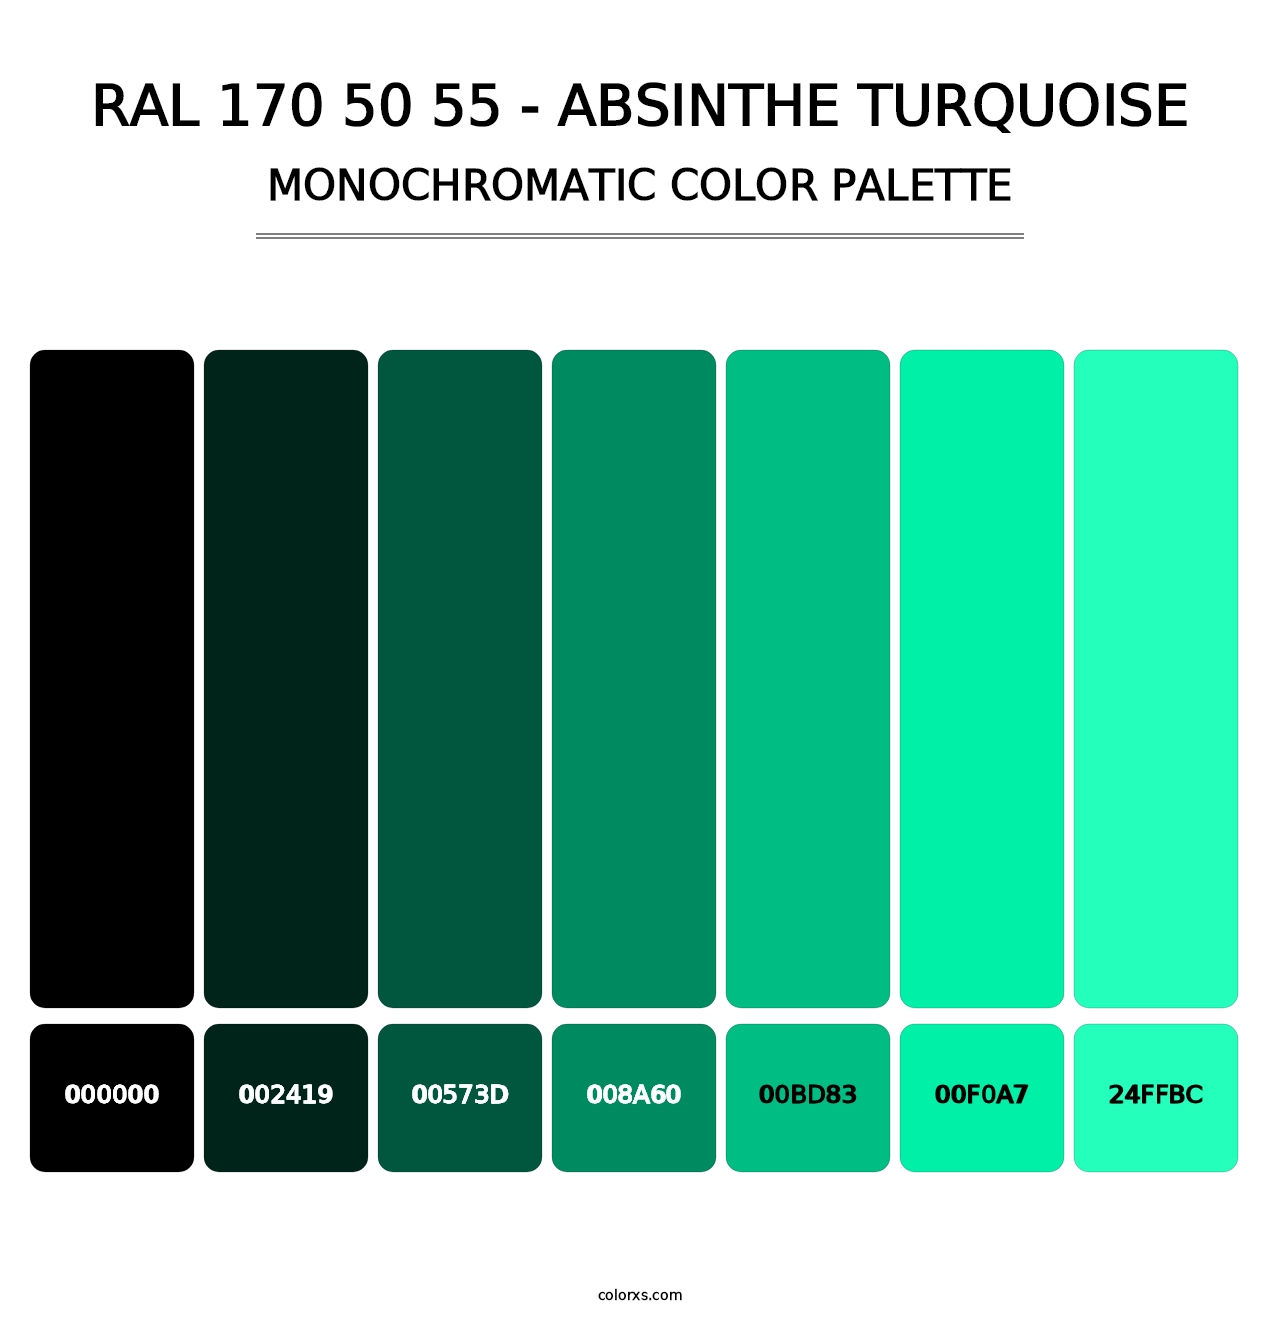 RAL 170 50 55 - Absinthe Turquoise - Monochromatic Color Palette